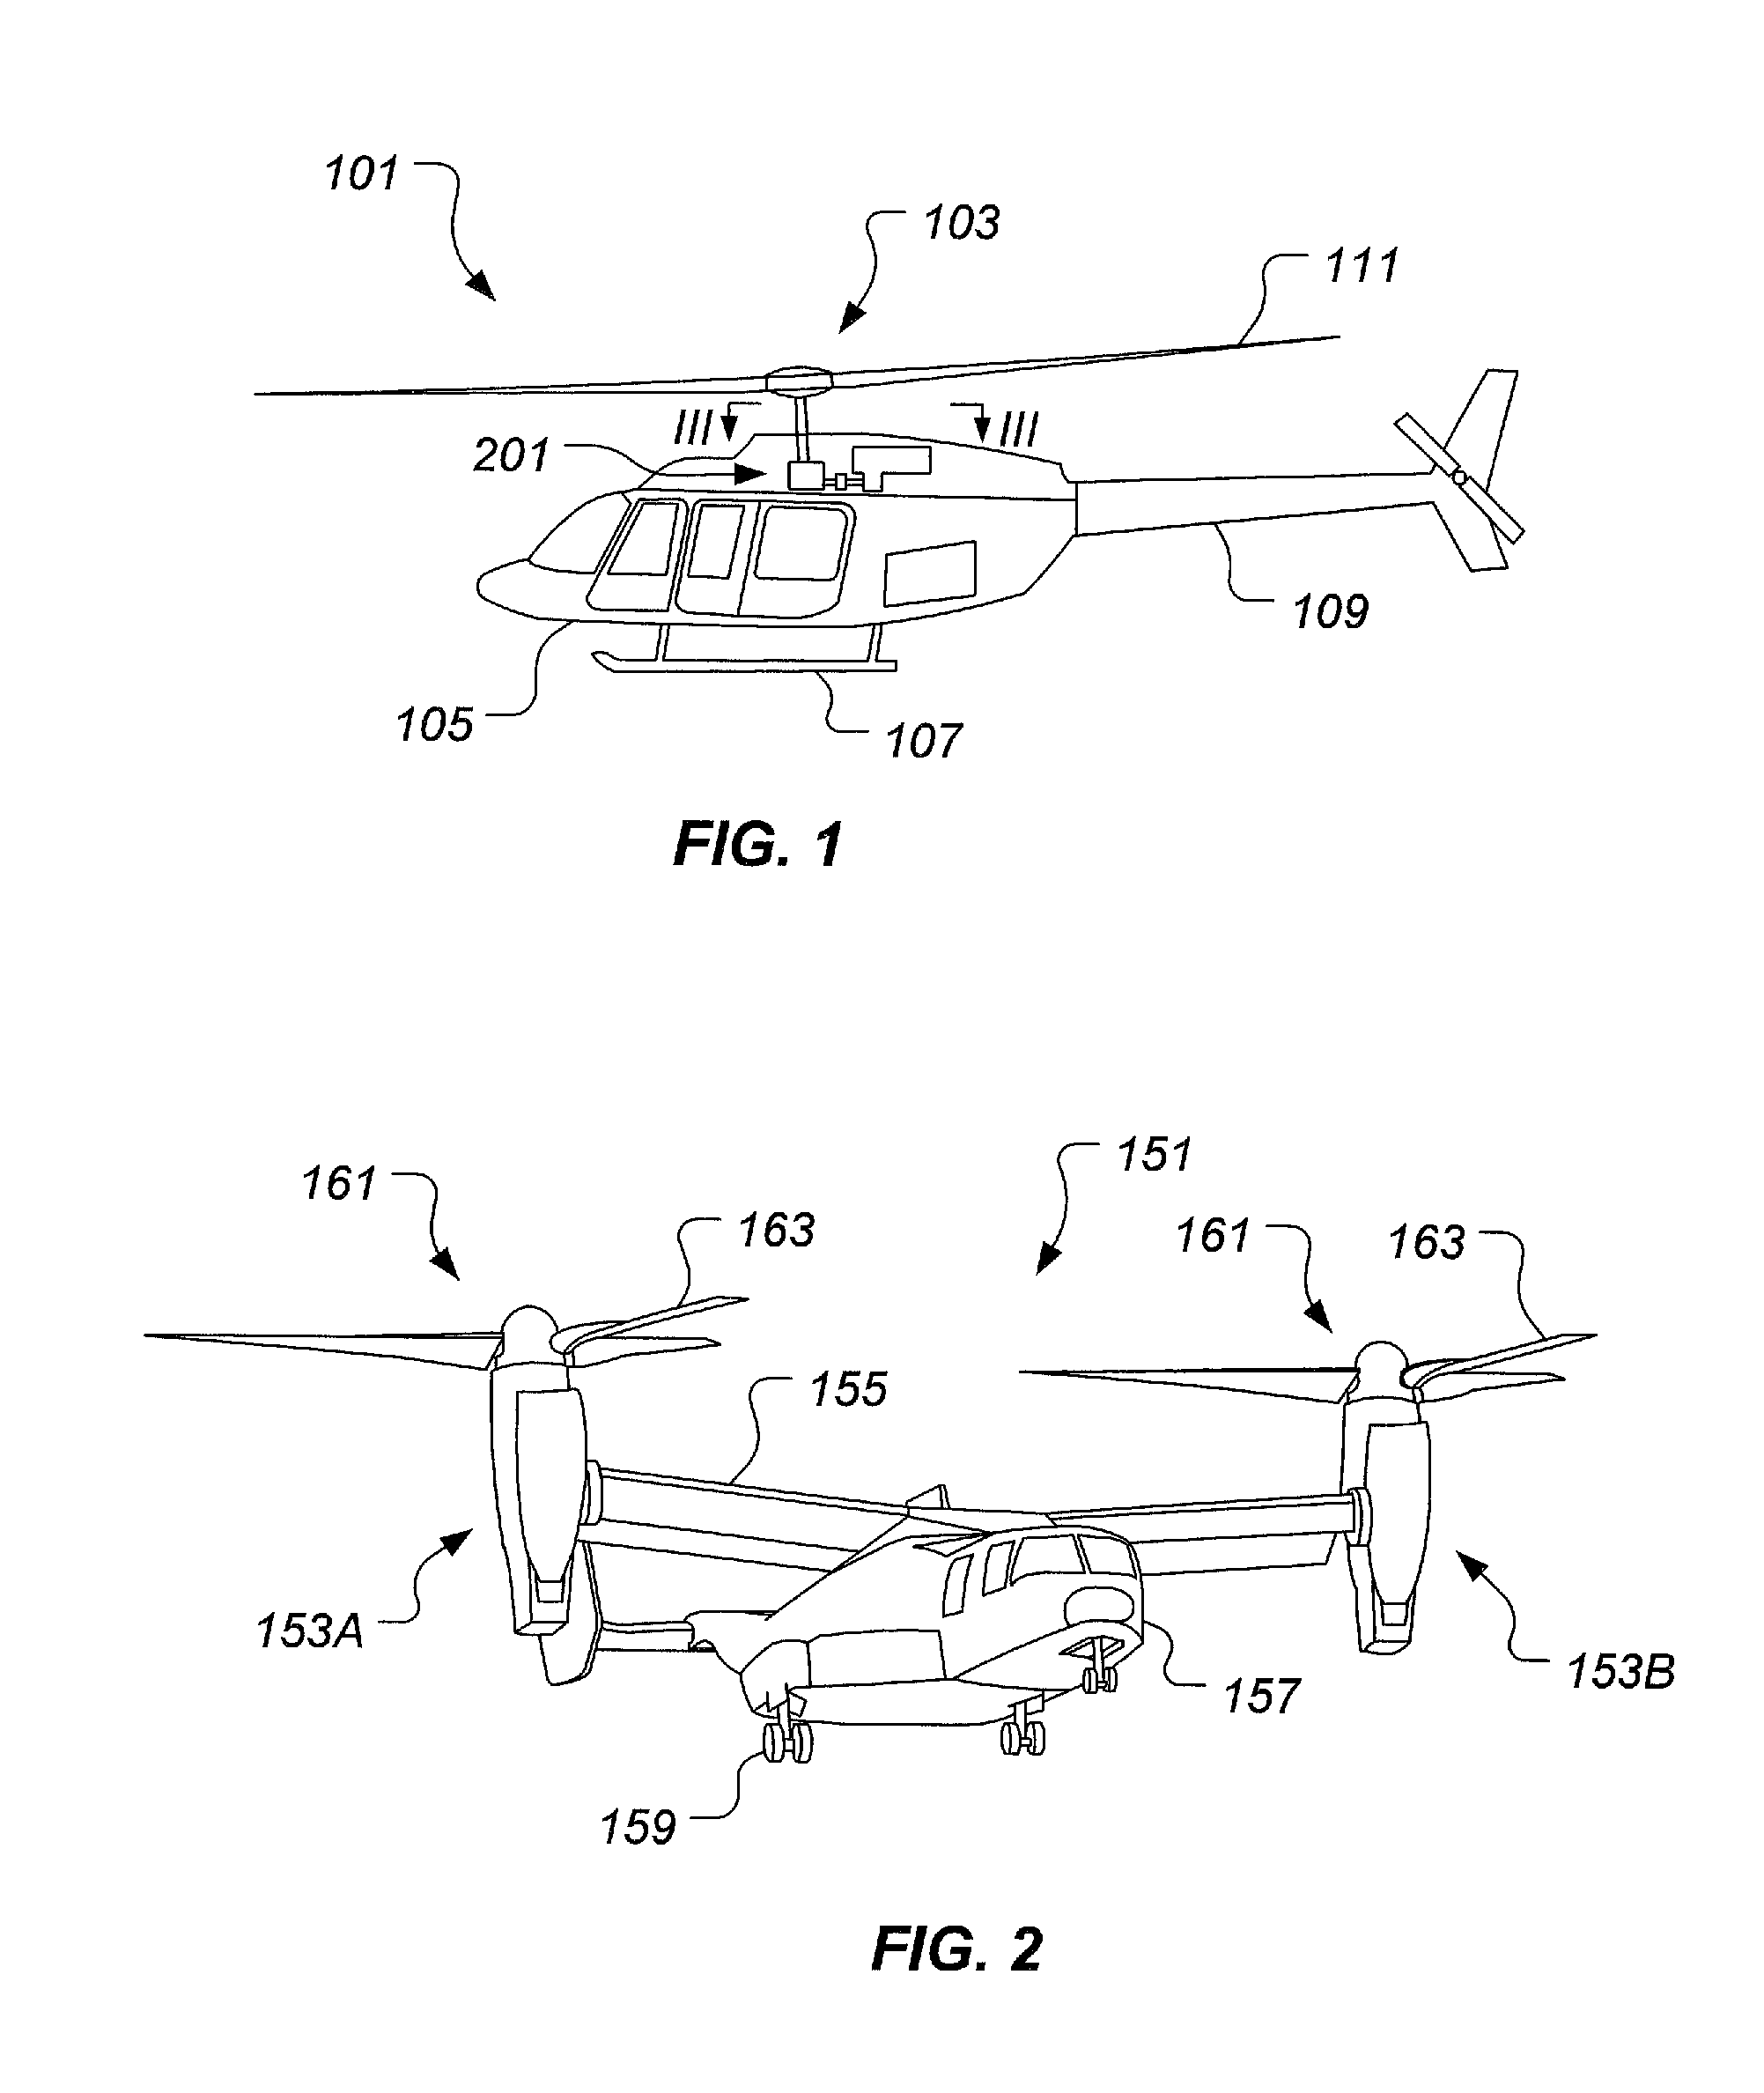 System and method of augmenting power in a rotorcraft